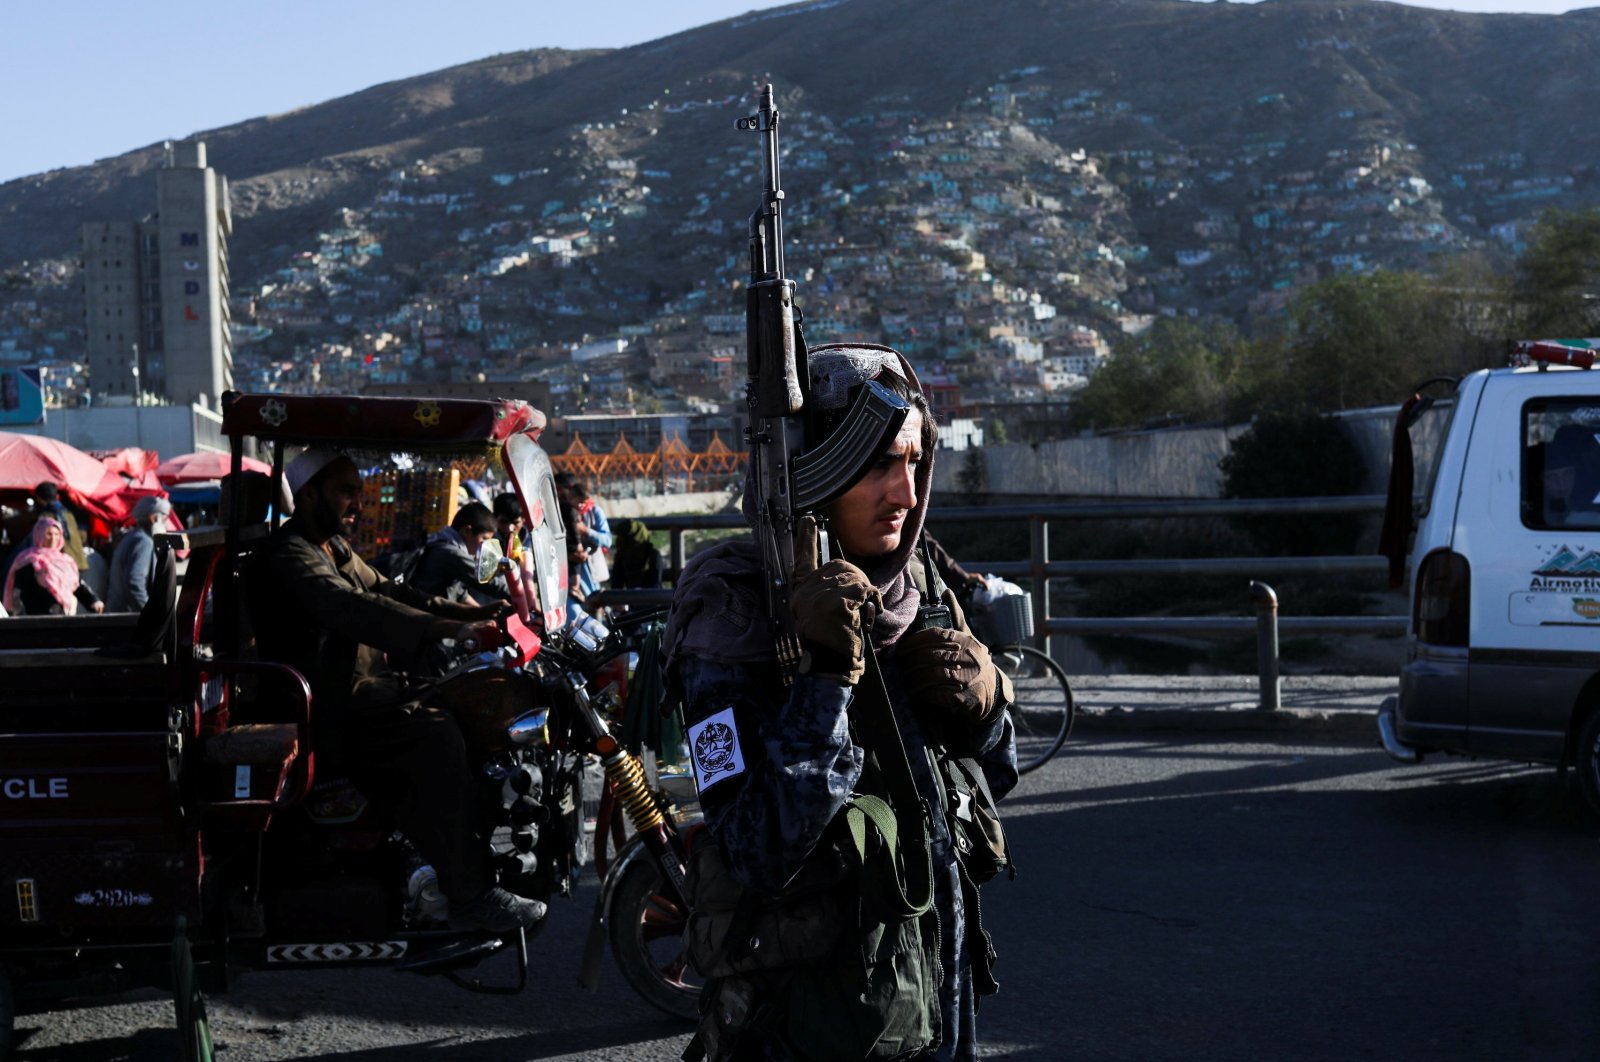 A Taliban soldier stands on a street in Kabul, Afghanistan, Sept. 16, 2021. (Reuters Photo)